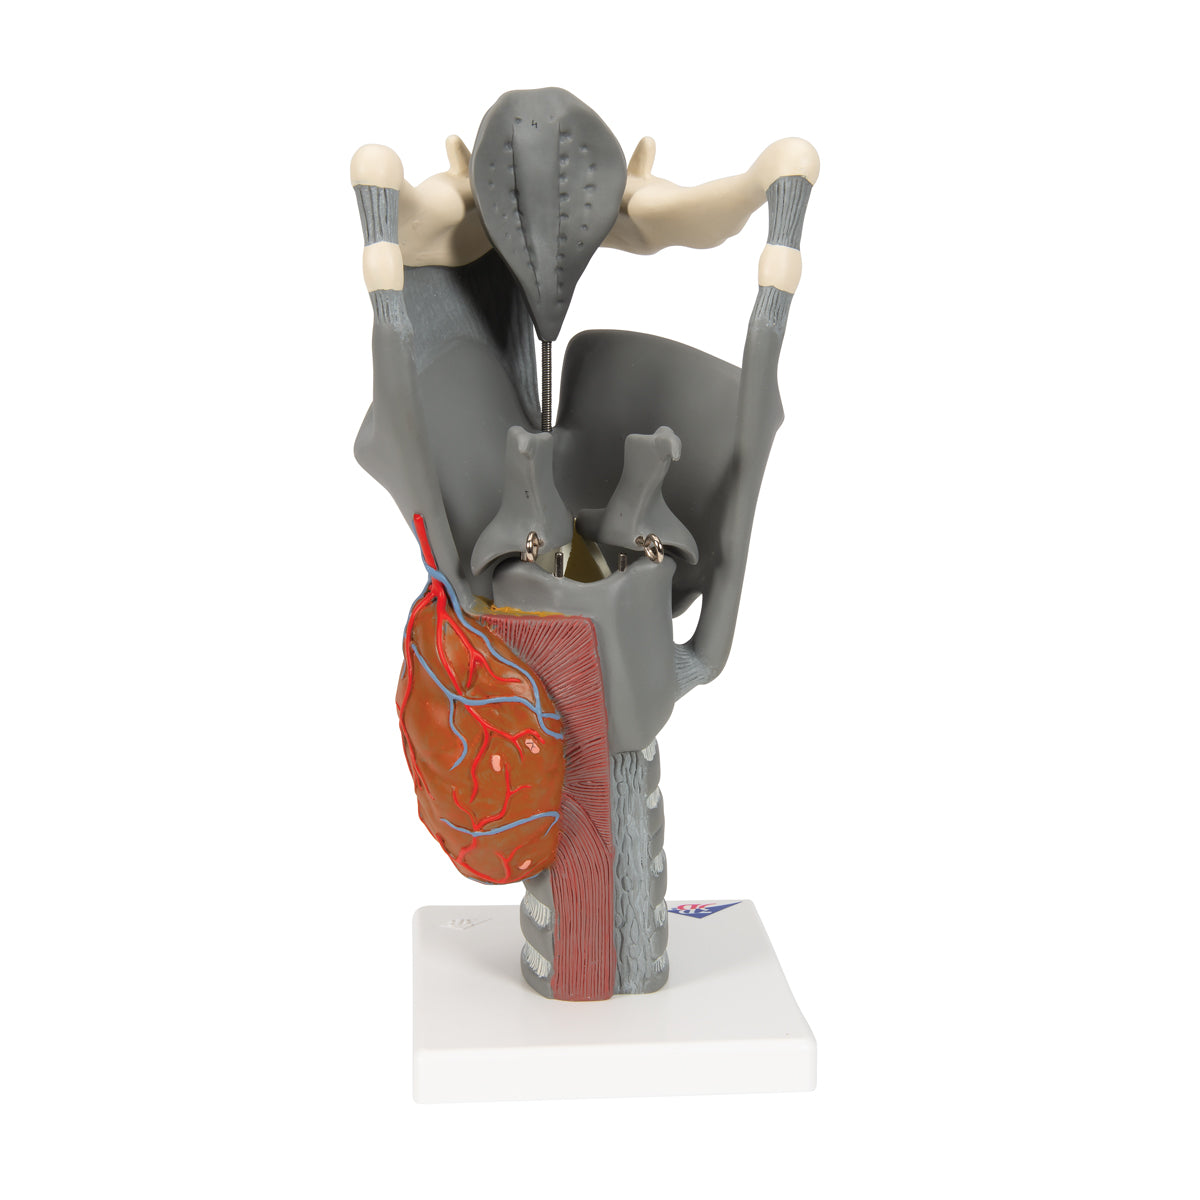 Model of the larynx with movable nasal cartilages and epiglottis